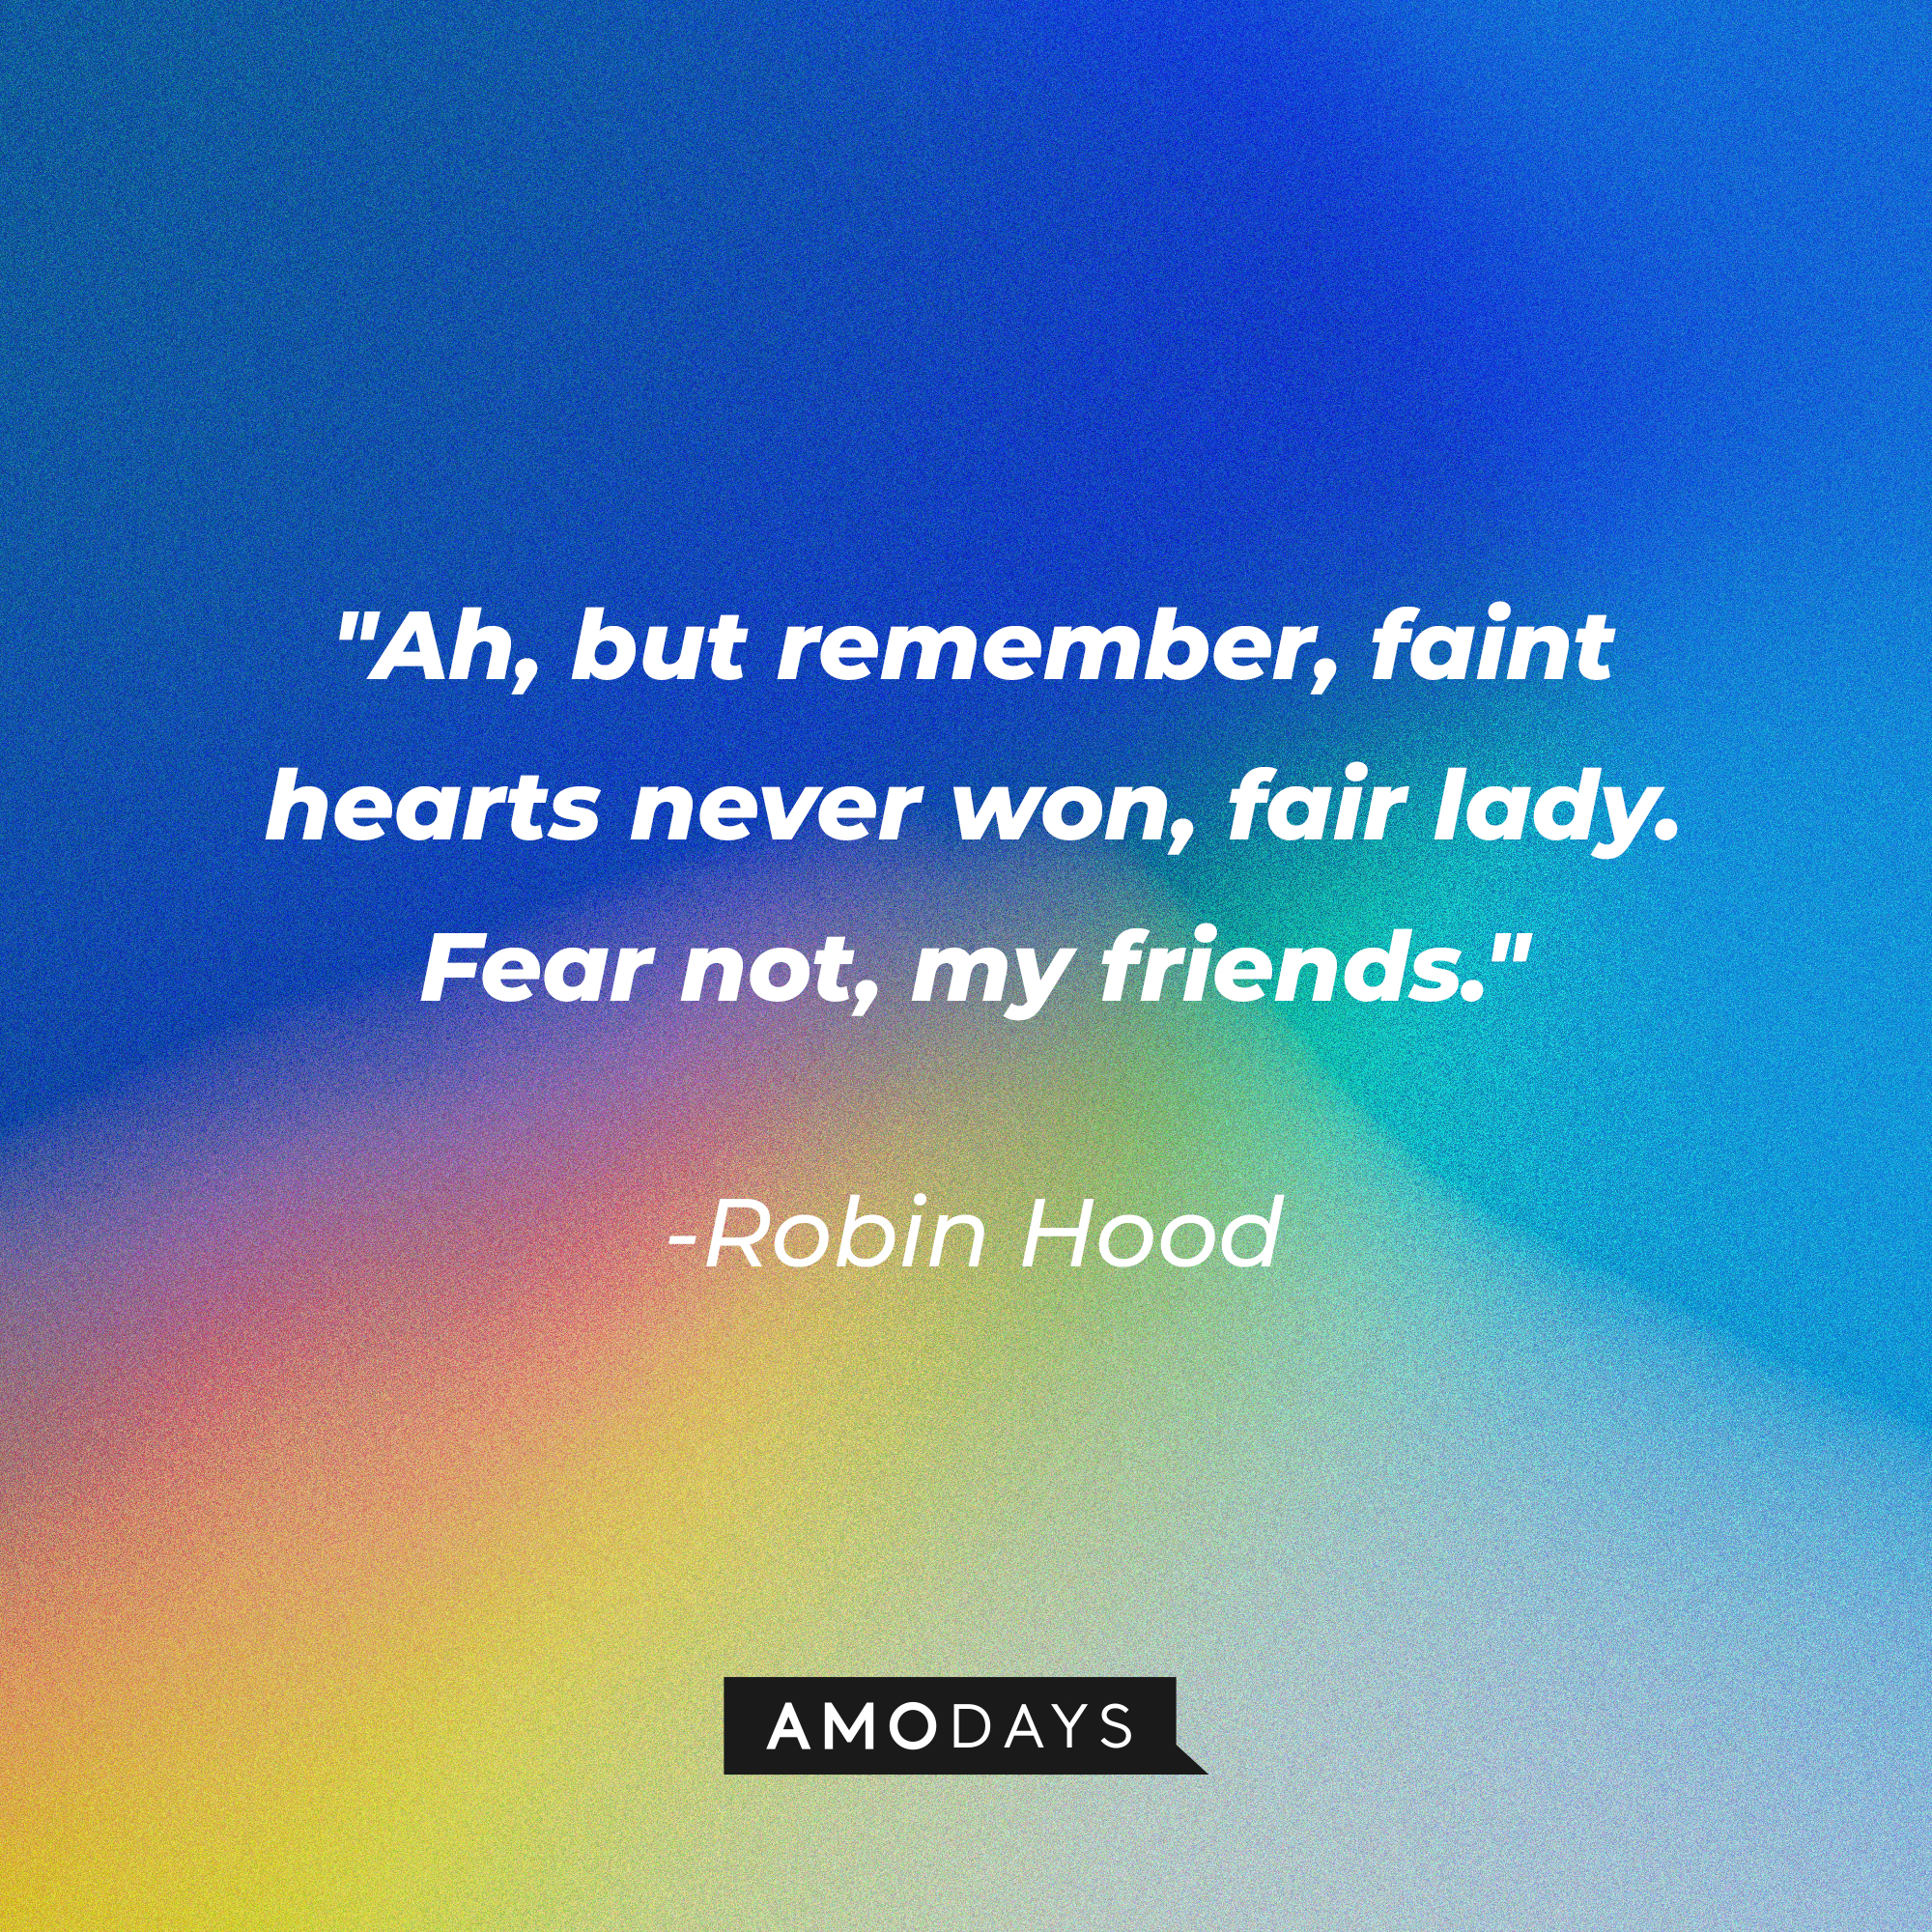 Robin Hood's quote: "Ah, but remember, faint hearts never won, fair lady. Fear not, my friends." | Source: Amodays